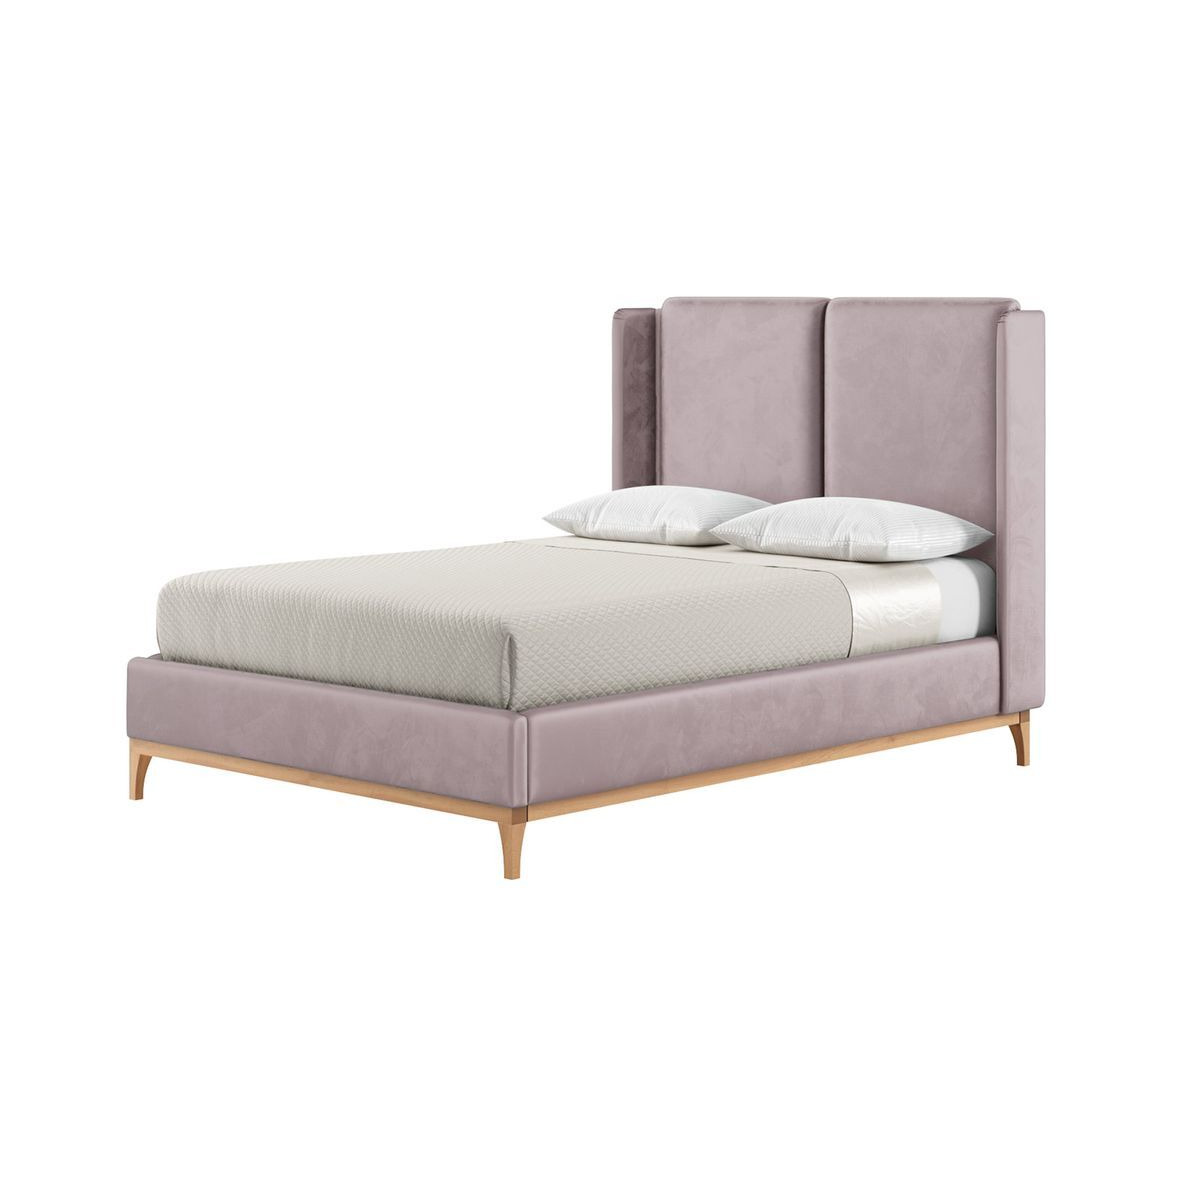 Emily 4ft6 Double Bed Frame with contemporary twin panel wing headboard, lilac, Leg colour: like oak - image 1